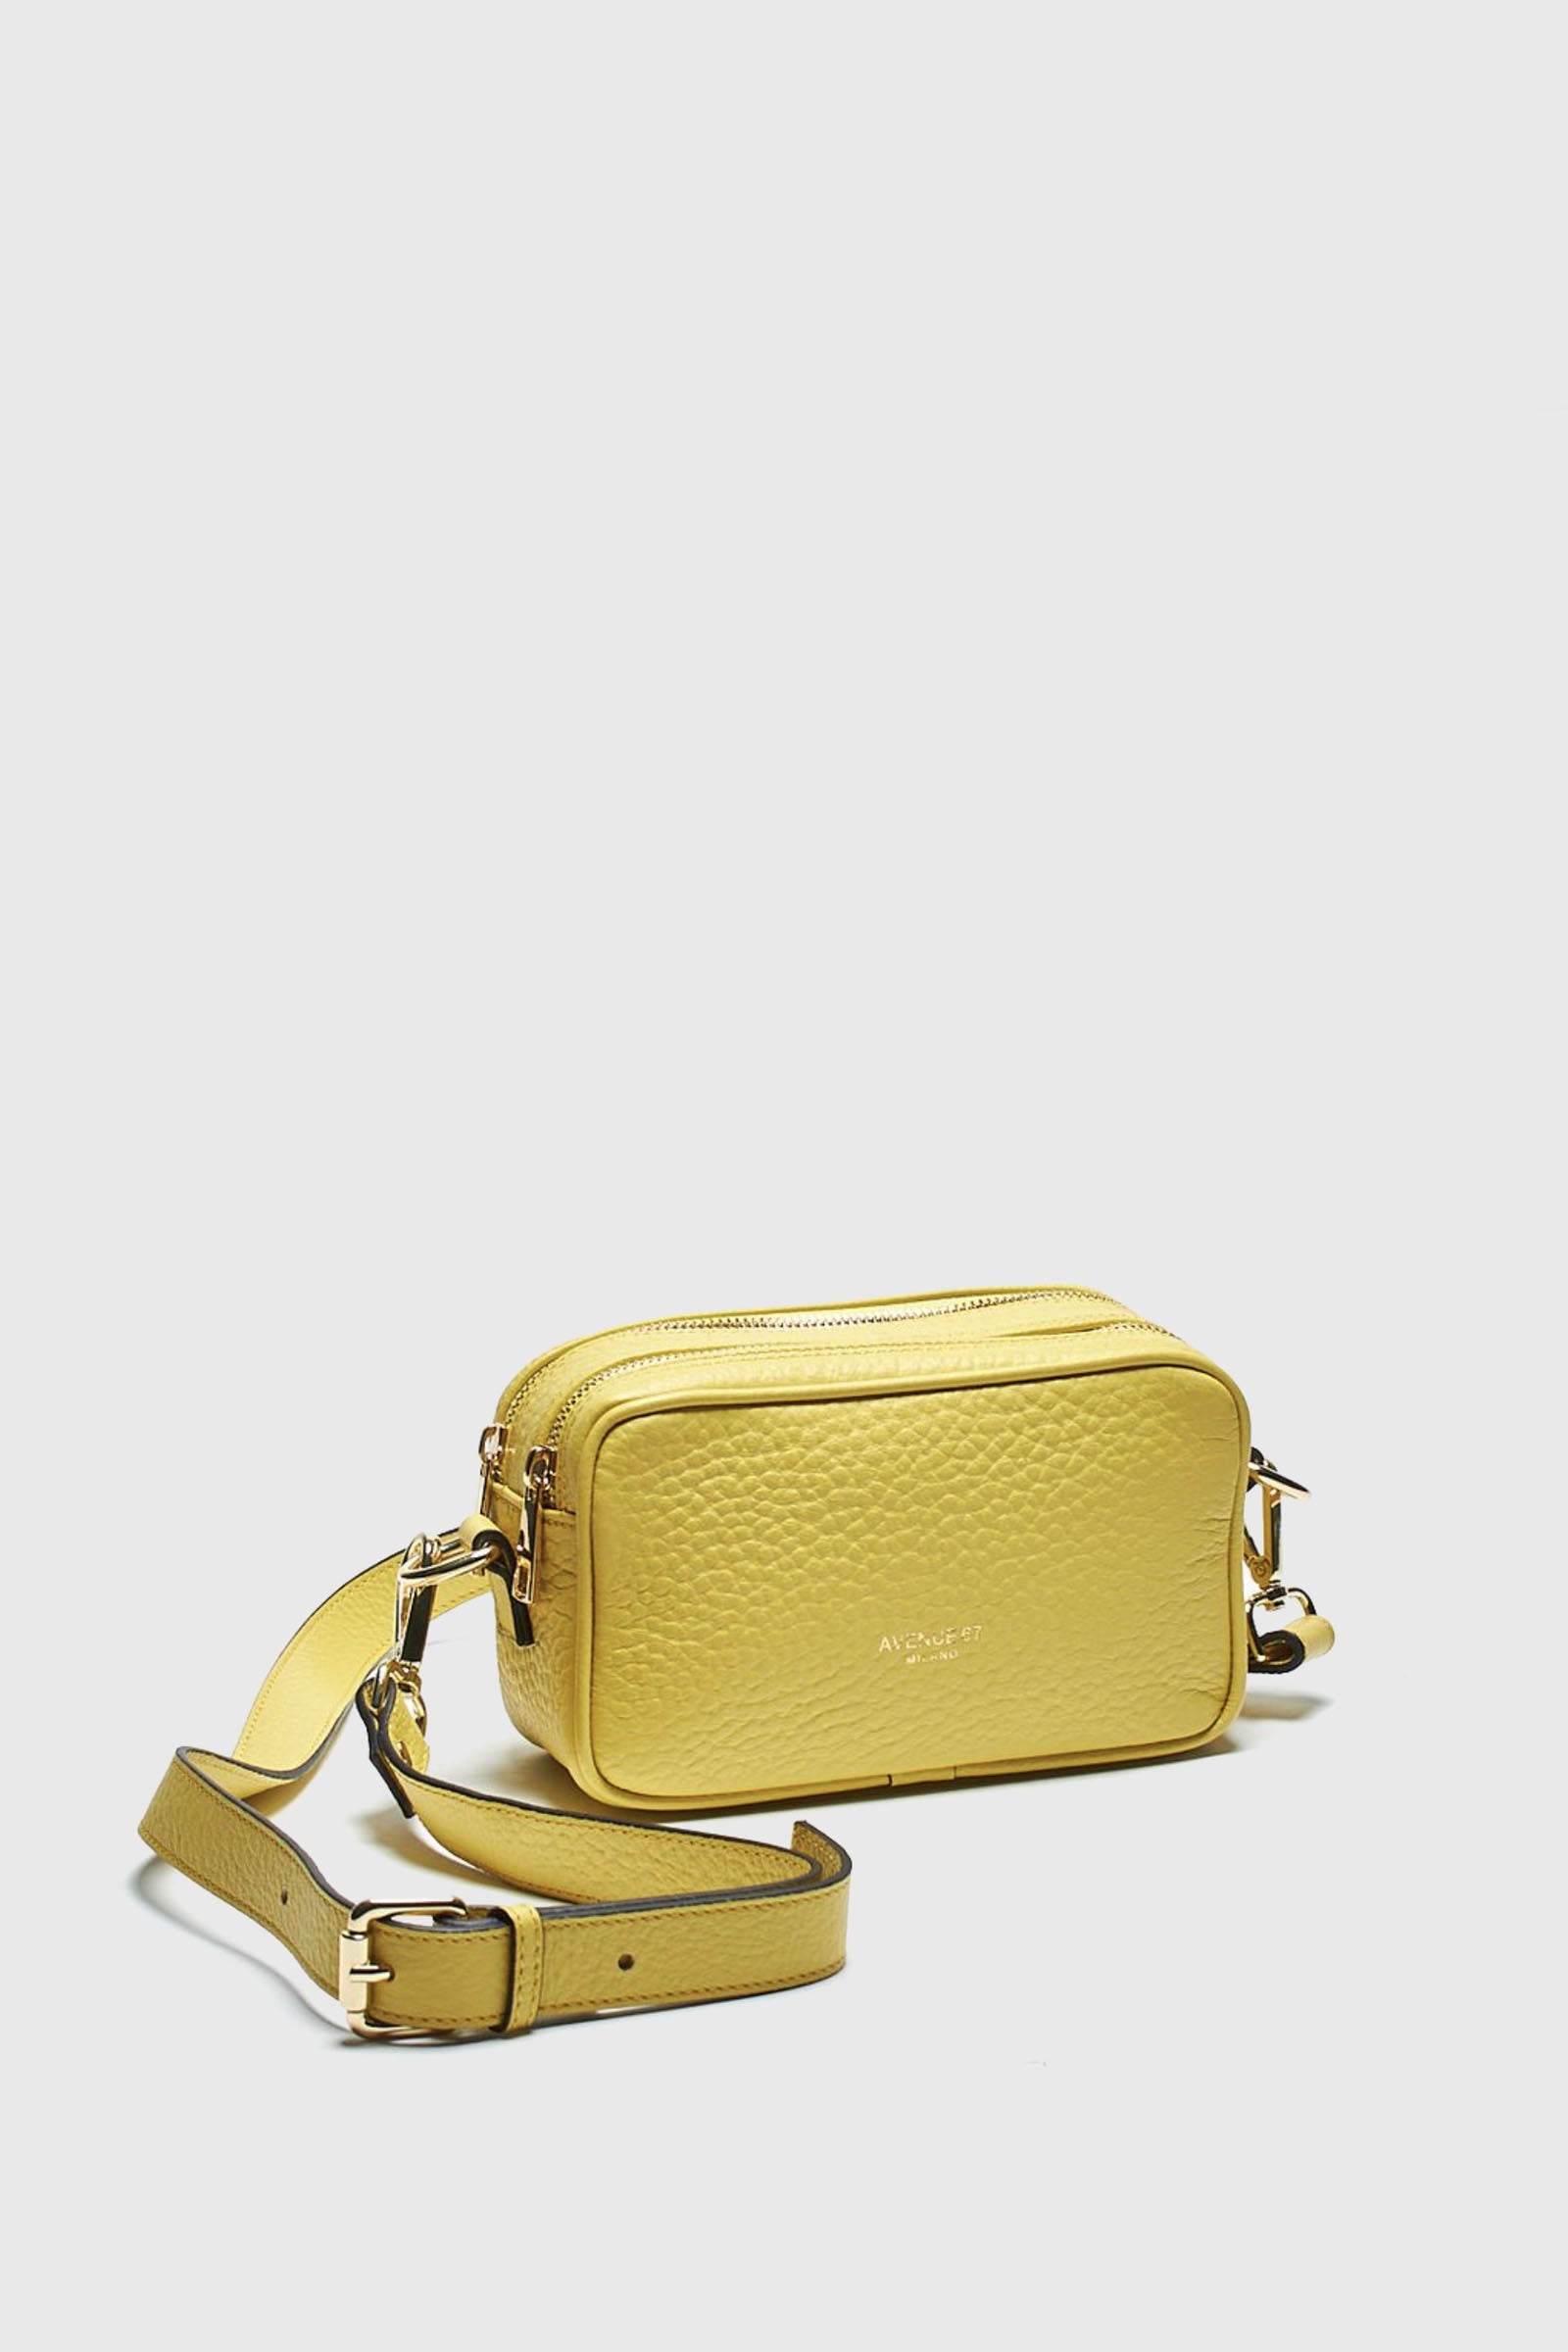 Avenue 67 Gabrielle Leather Bag Yellow - 3